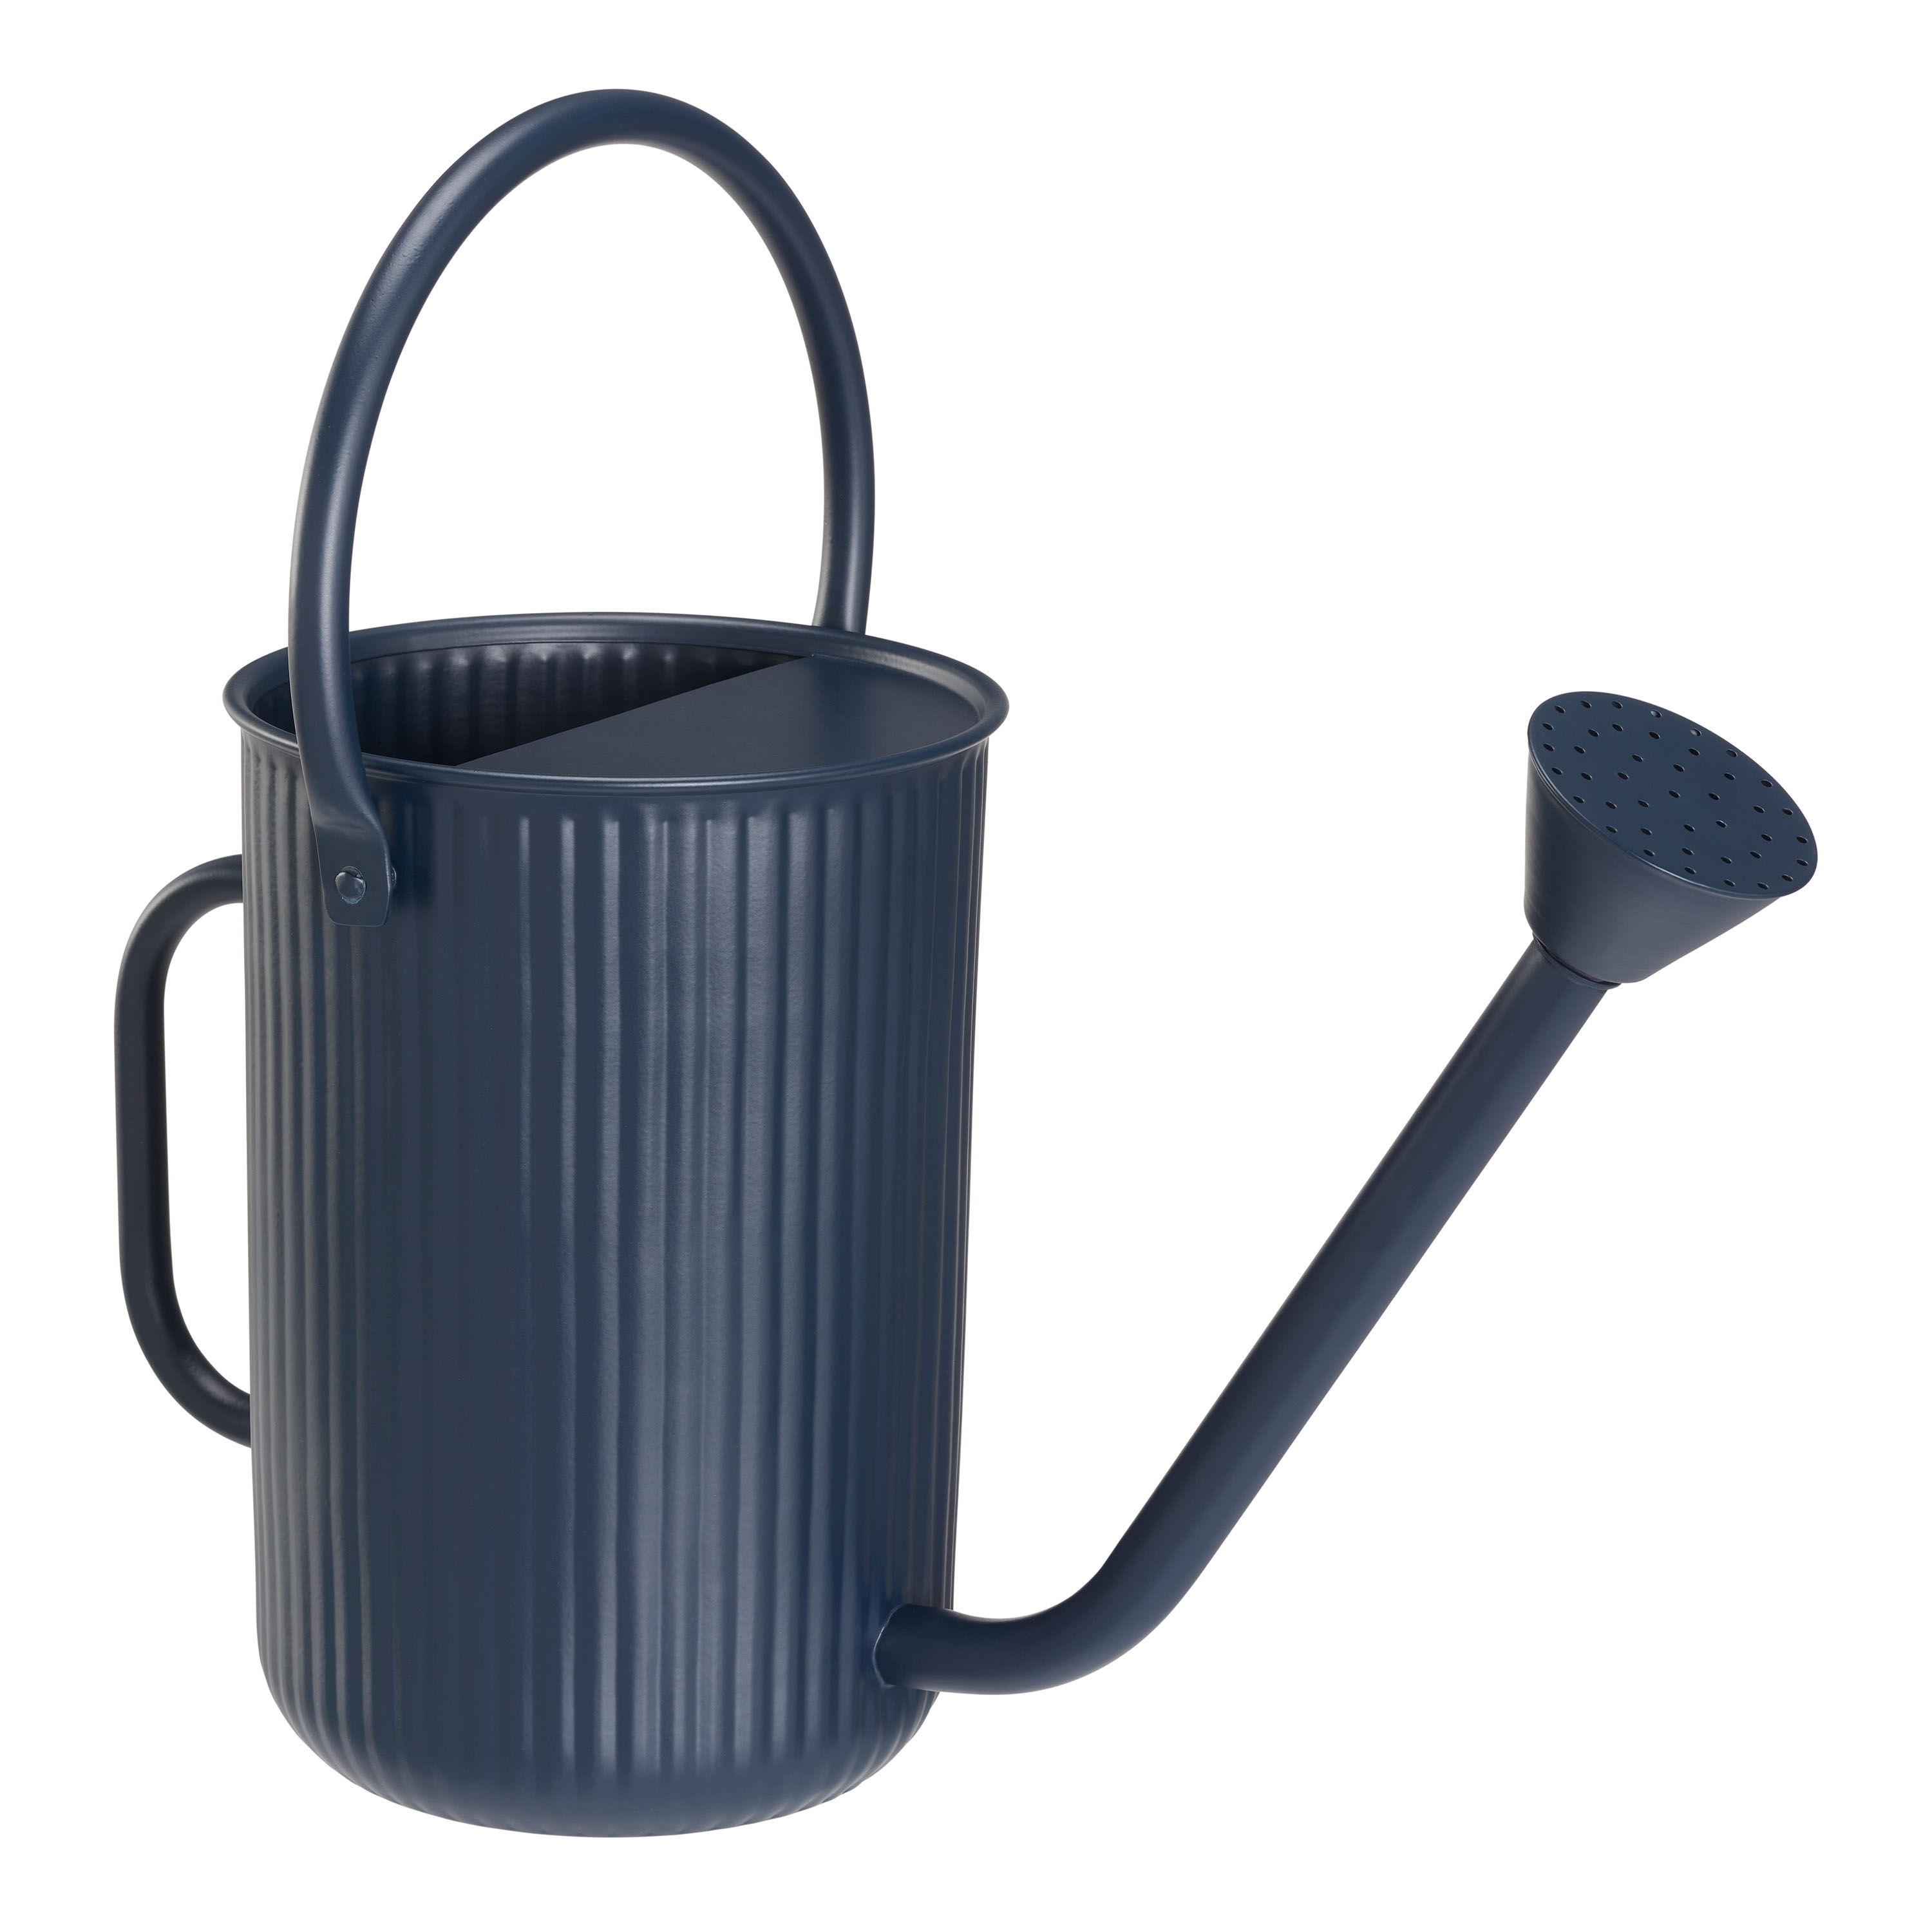 Better Homes & Gardens 1.2 gal Steel Watering Can, Blue Cove - image 1 of 5